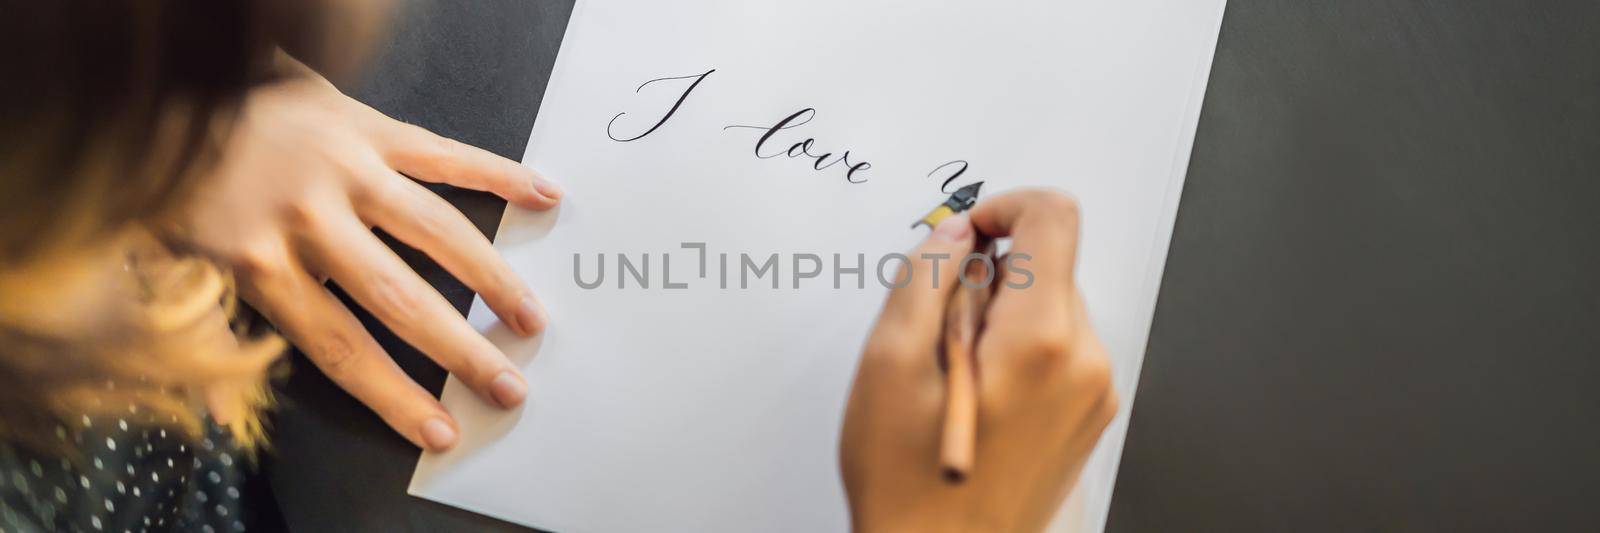 I love you. Calligrapher Young Woman writes phrase on white paper. Inscribing ornamental decorated letters. Calligraphy, graphic design, lettering, handwriting, creation concept. BANNER, LONG FORMAT